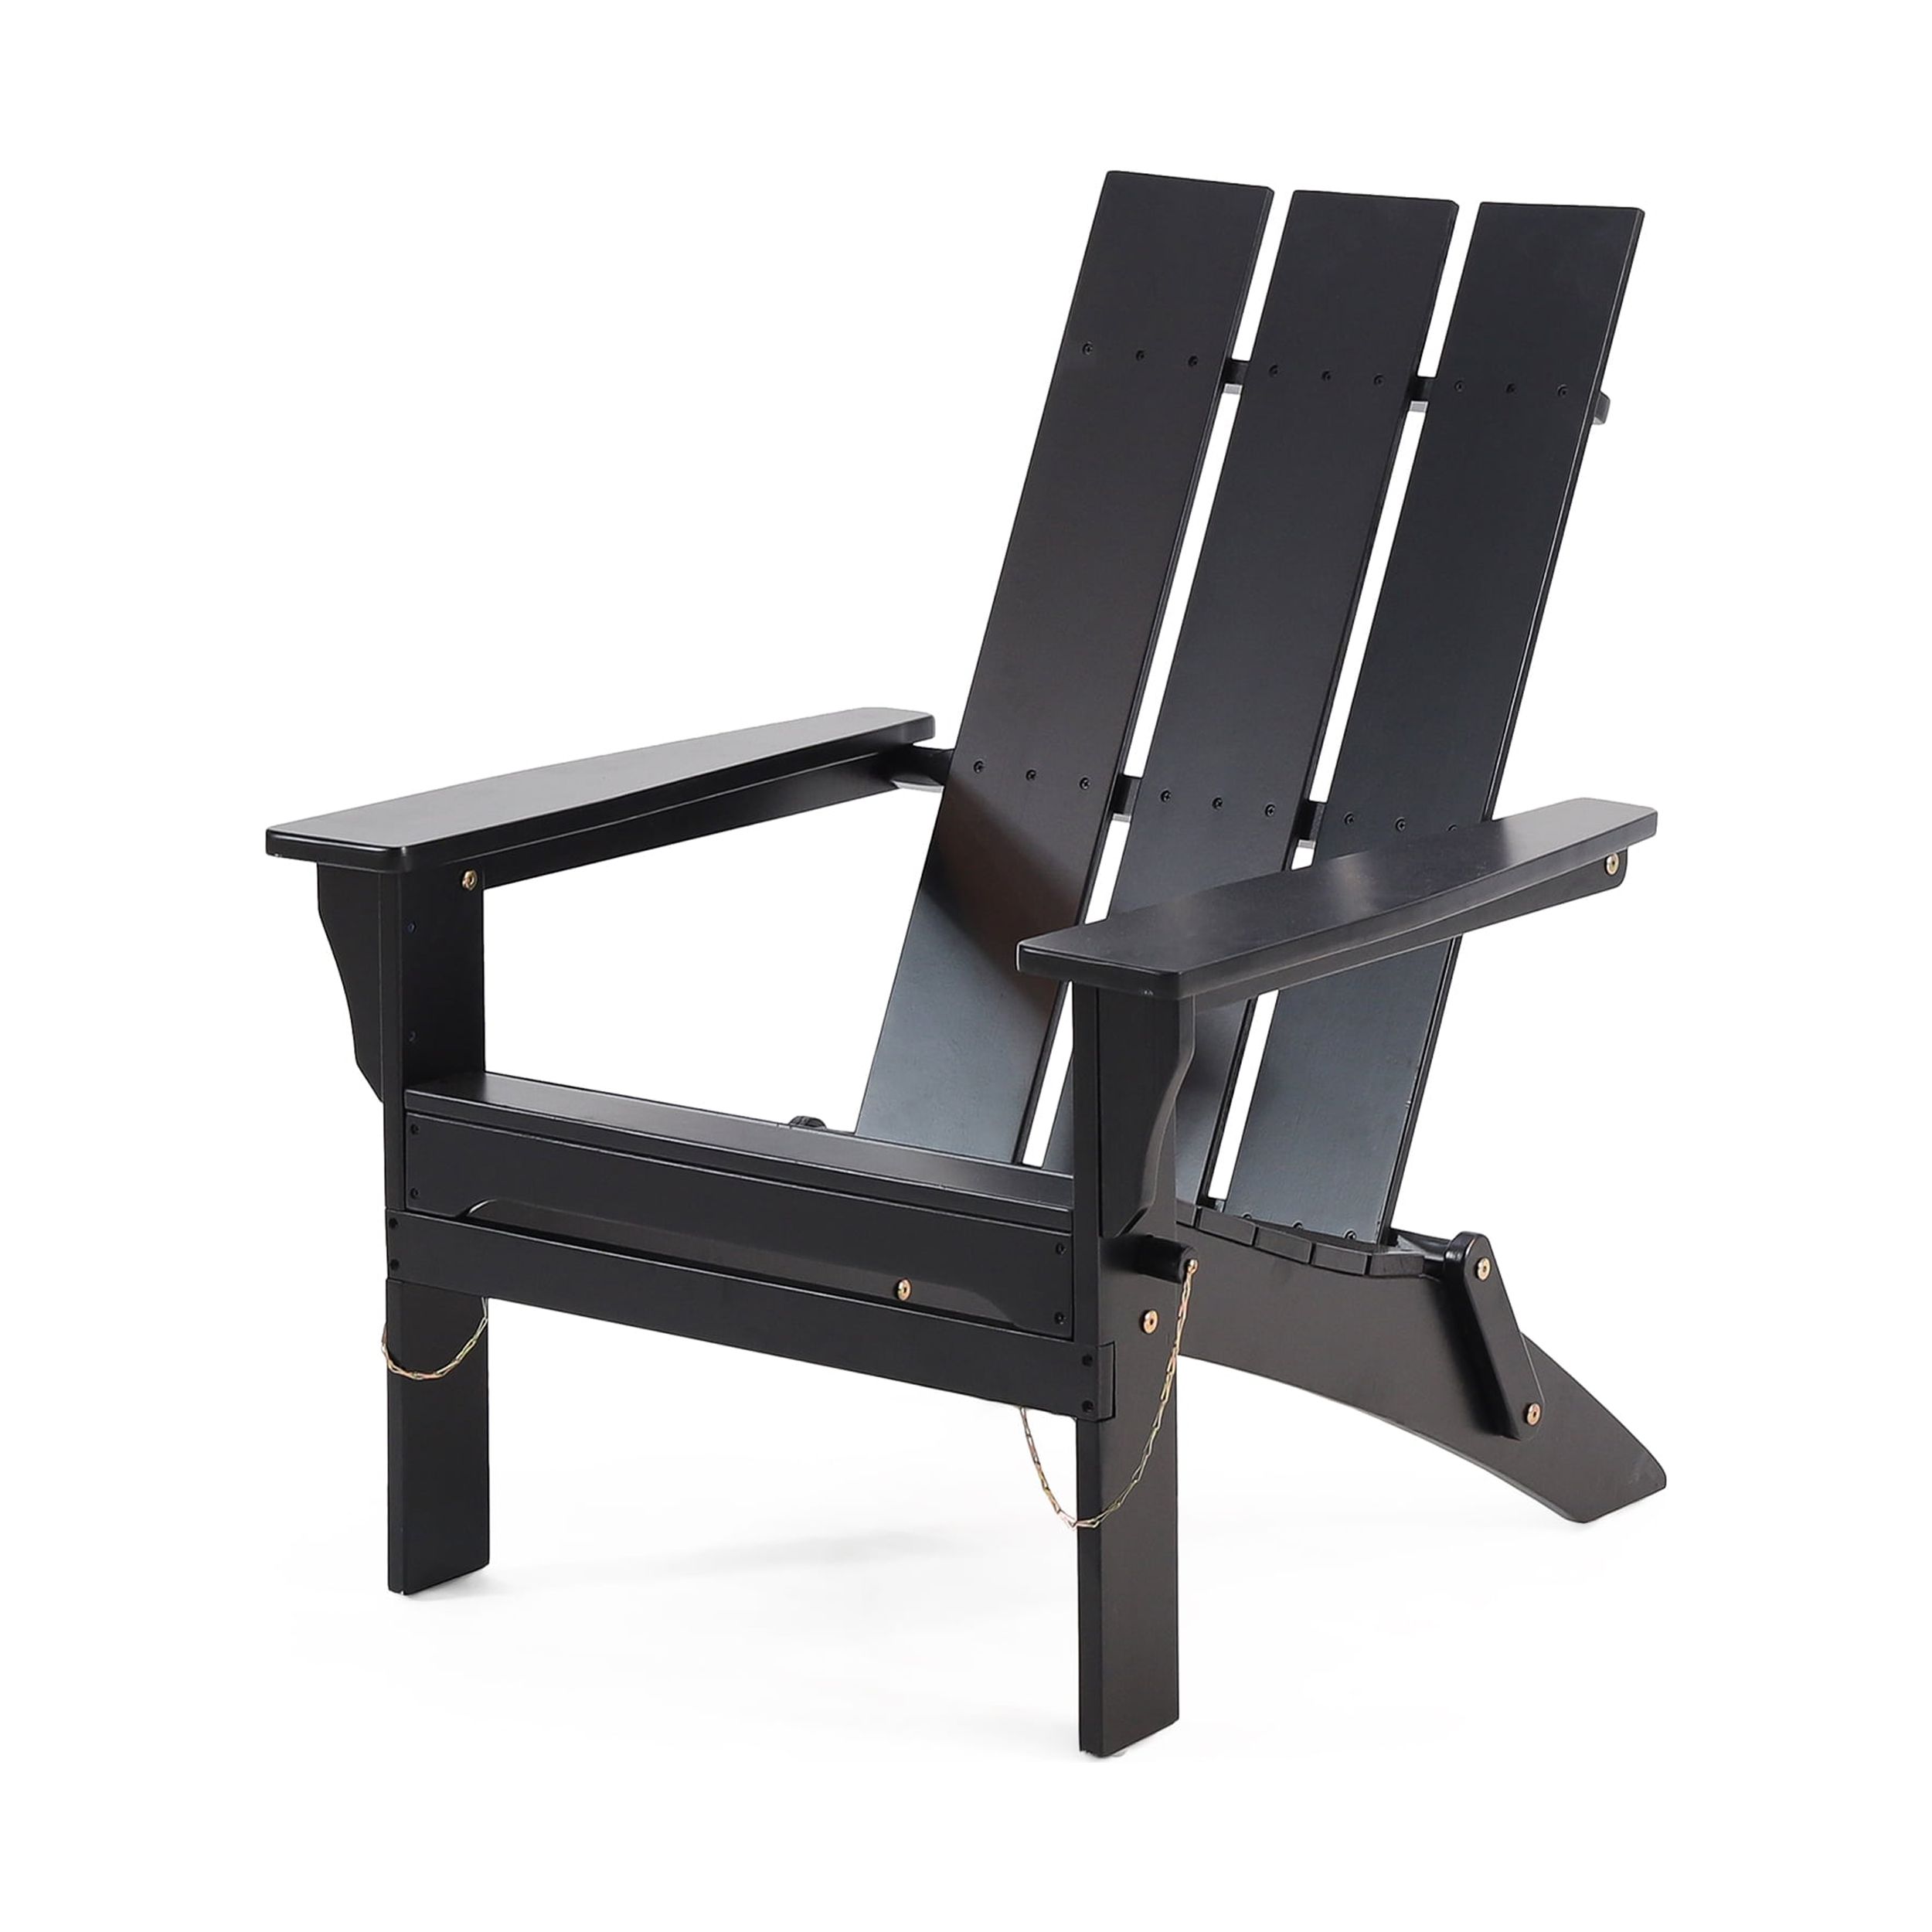 Eliphaz Outdoor Contemporary Acacia Wood Foldable Adirondack Chair, Black - image 1 of 9